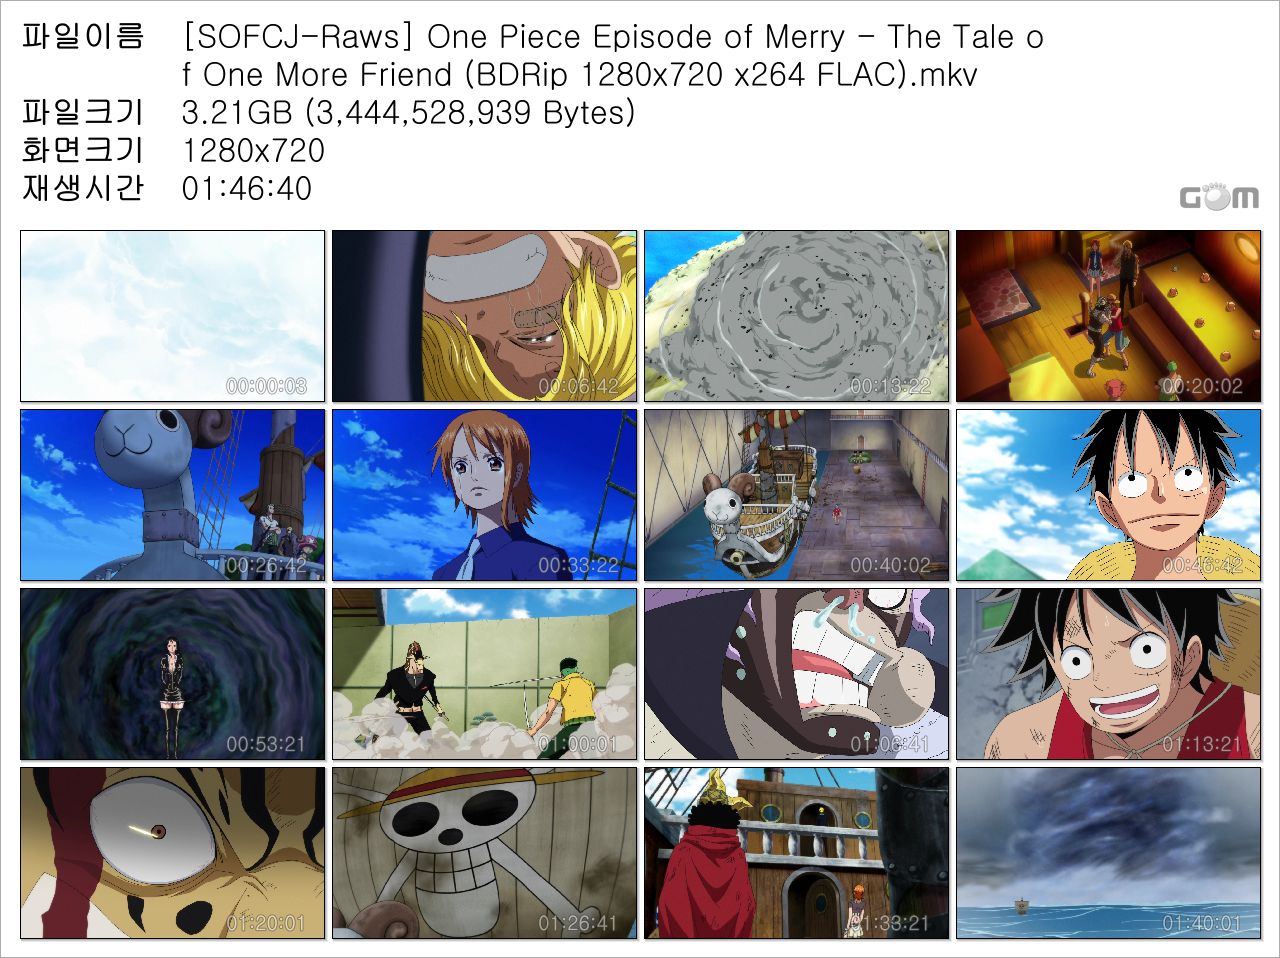 [SOFCJ-Raws] One Piece Episode of Merry - The Tale of One More Friend (BDRip 1280x720 x264 FLAC)_Snapshot.jpg